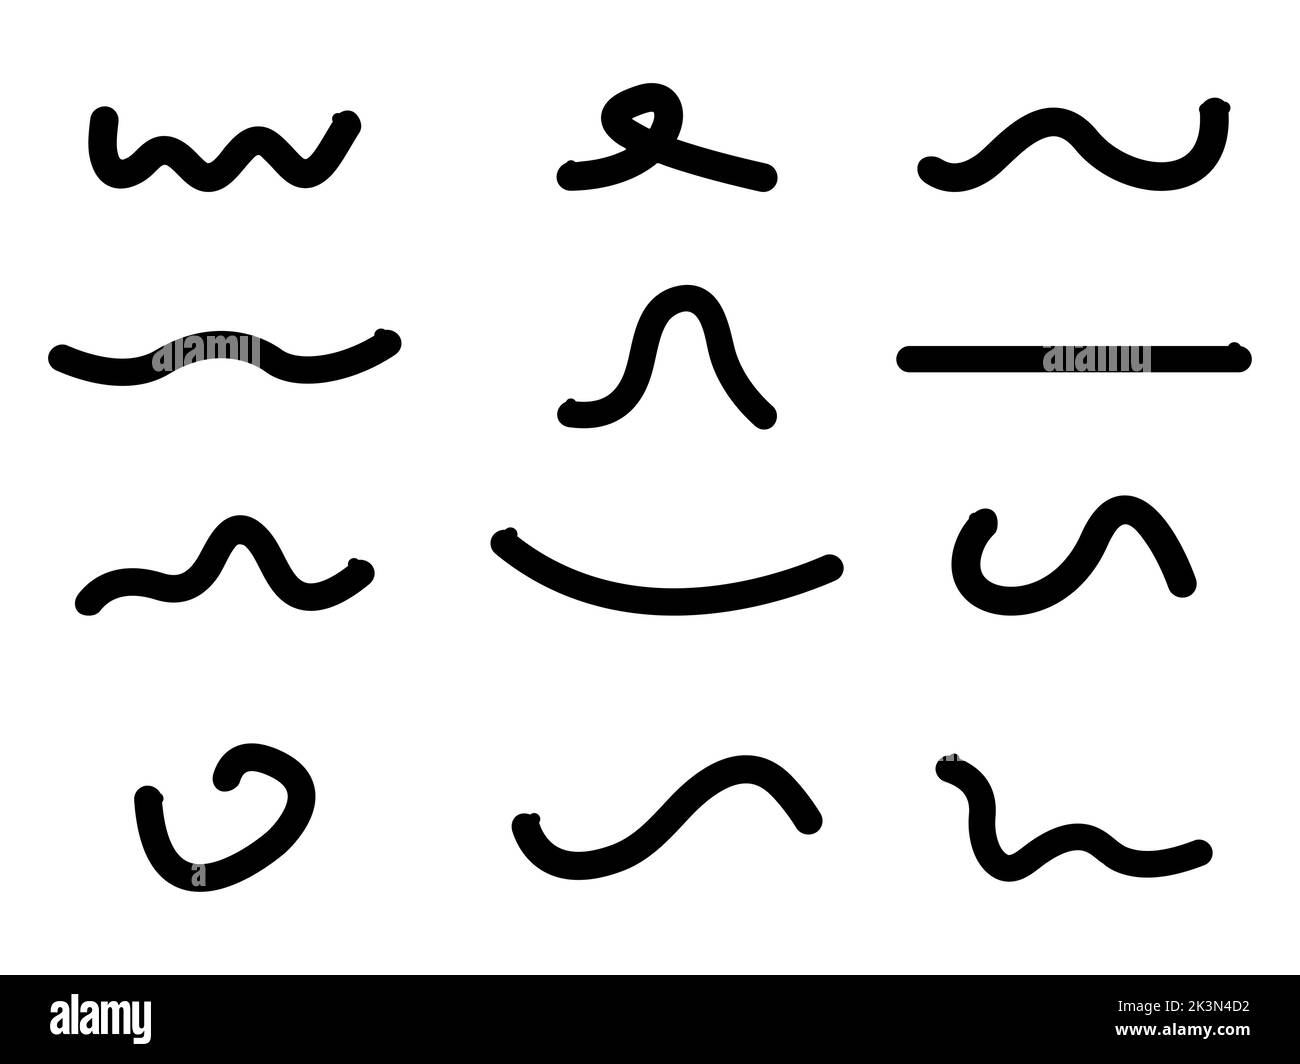 Worms silhouette set. Snakes symbols group. Earthworm collection. Vector isolated on white. Stock Vector